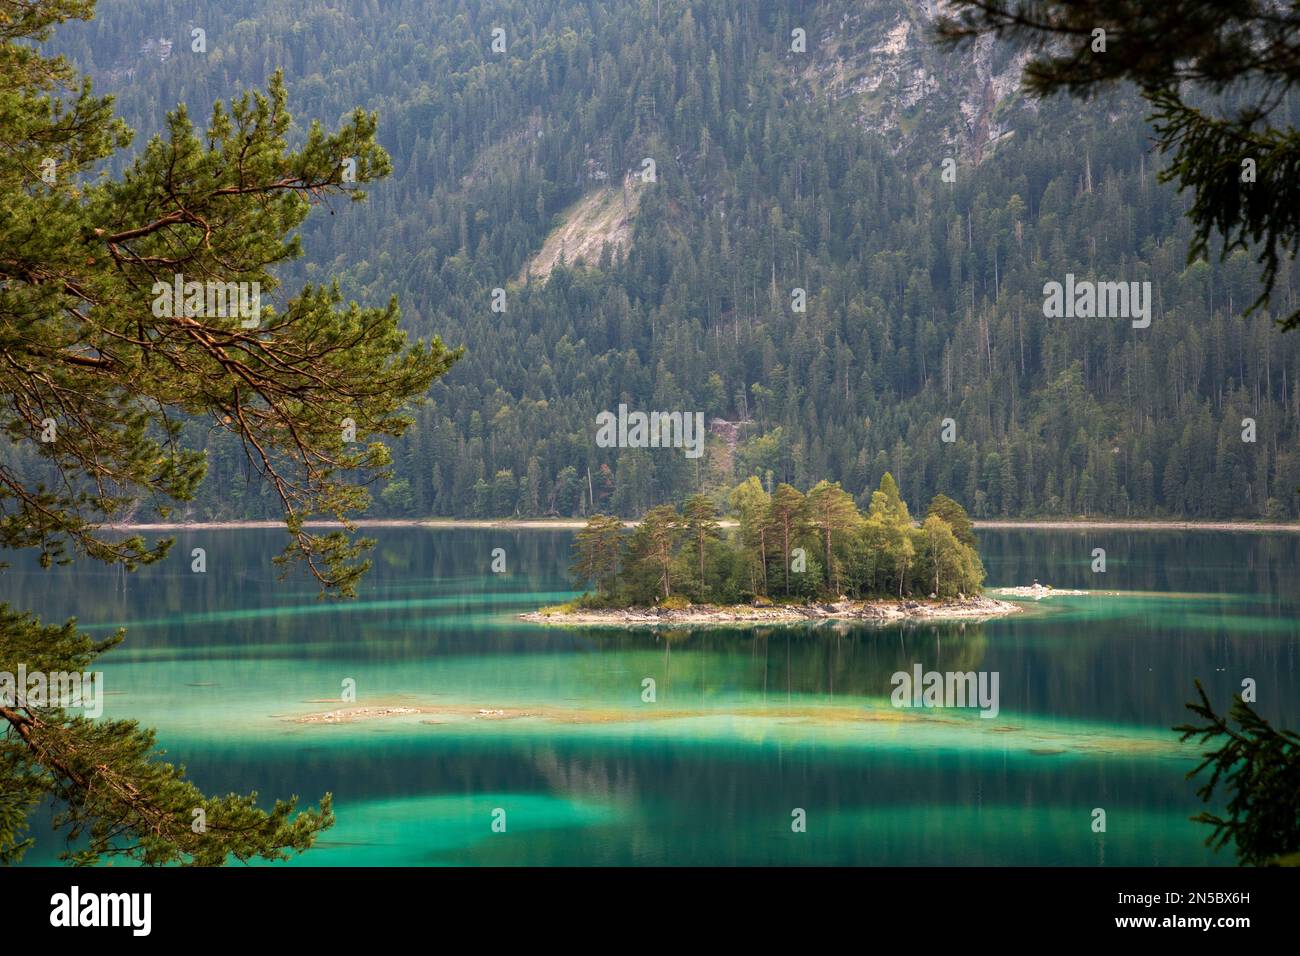 lake Eibsee with small islands in the turquoise water, Germany, Bavaria, Grainau Stock Photo